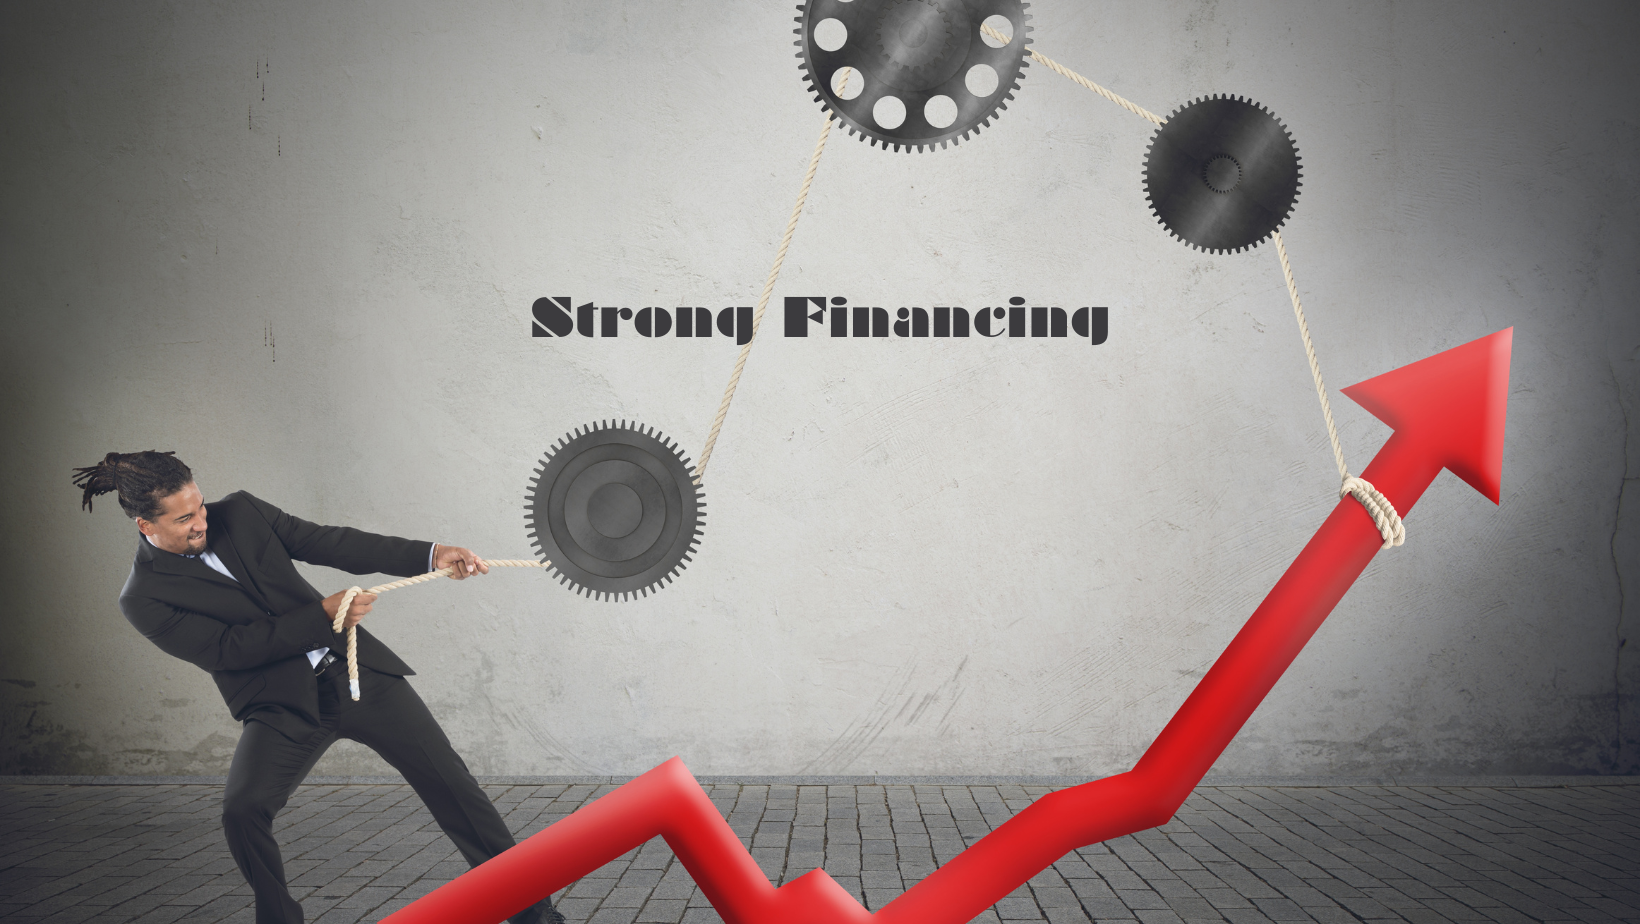 Strong Financing